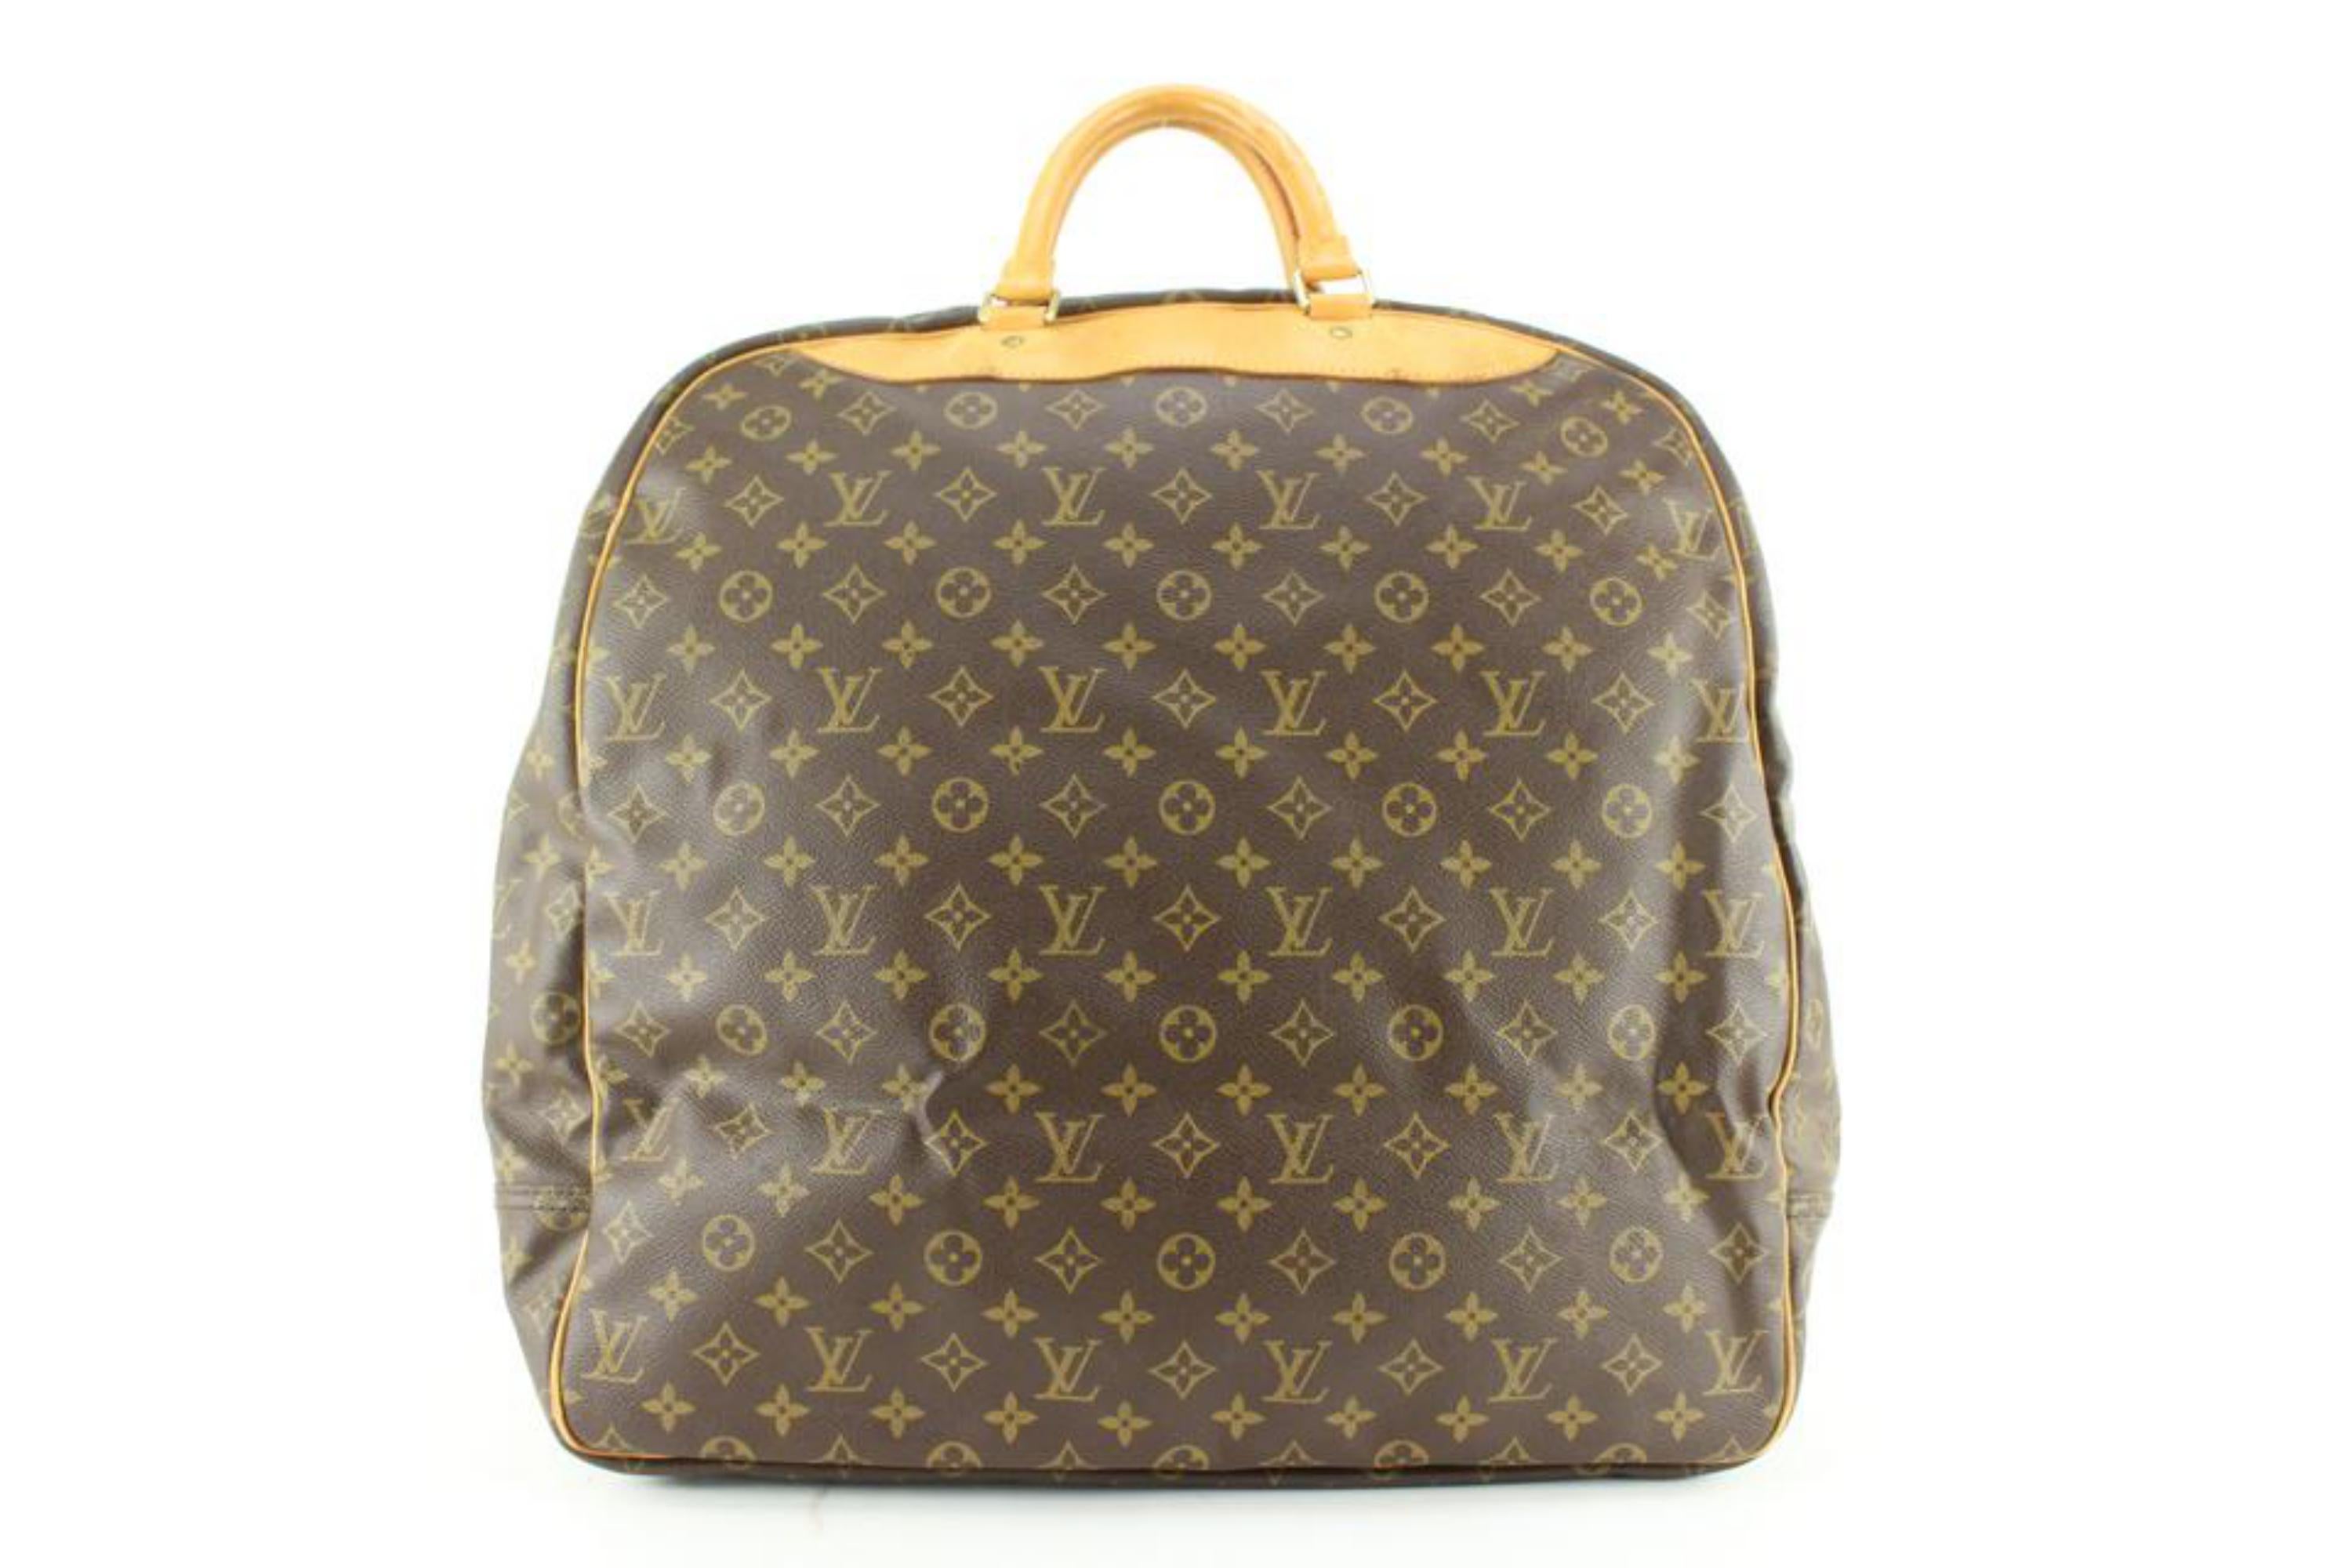 Louis Vuitton Monogram Sac Evasion Top Handle Travel Bag 80lz629s In Good Condition In Dix hills, NY